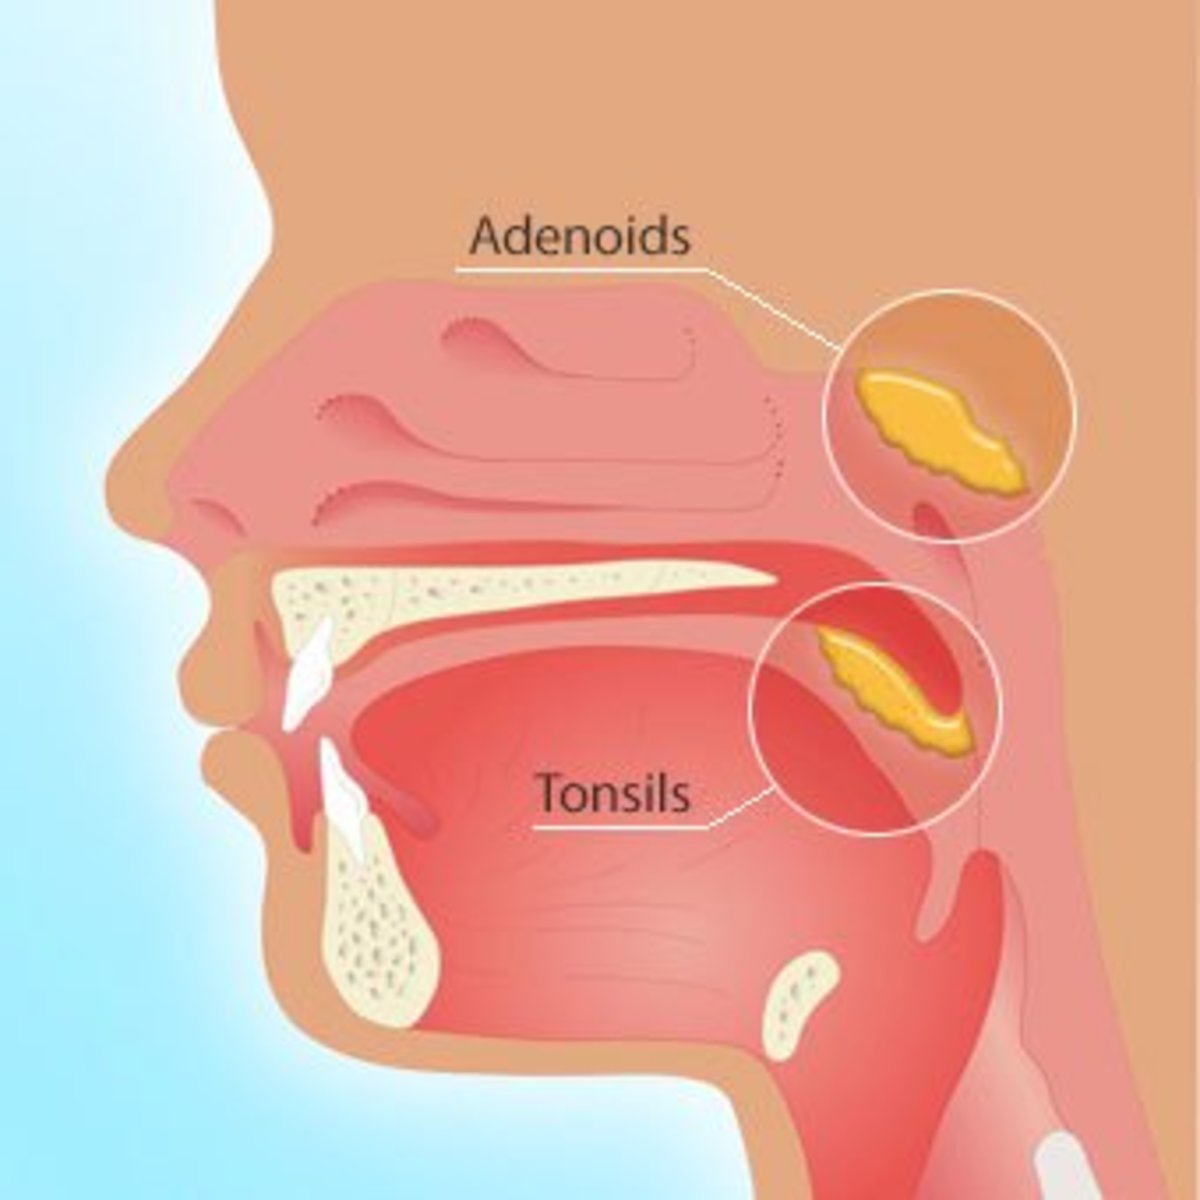 and throat Adult adenoids sore